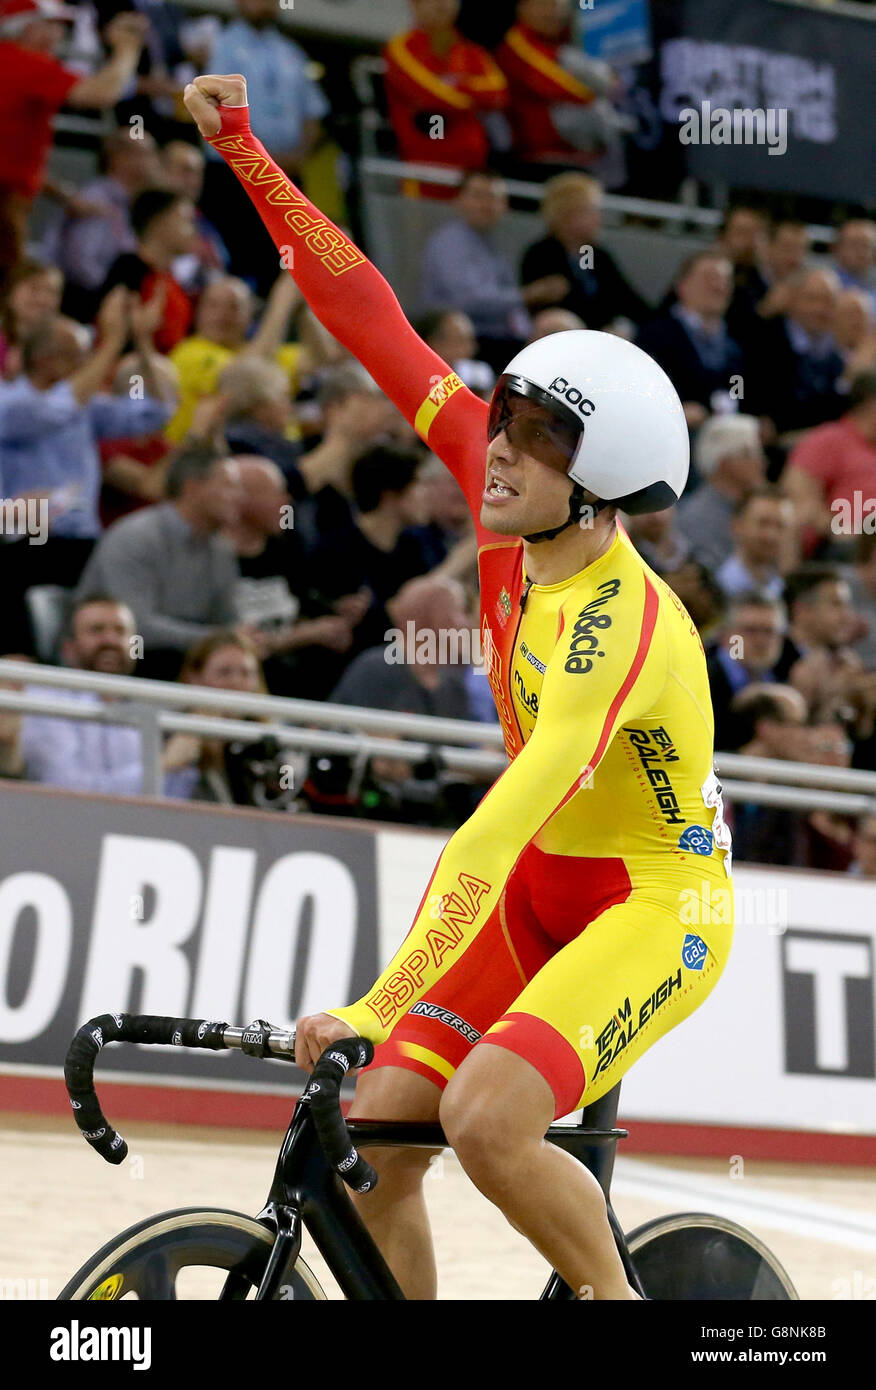 Spain's Sebastian Mora Vedri celebrates winning the Men's Scratch Race final during day one of the UCI Track Cycling World Championships at Lee Valley VeloPark, London. Stock Photo